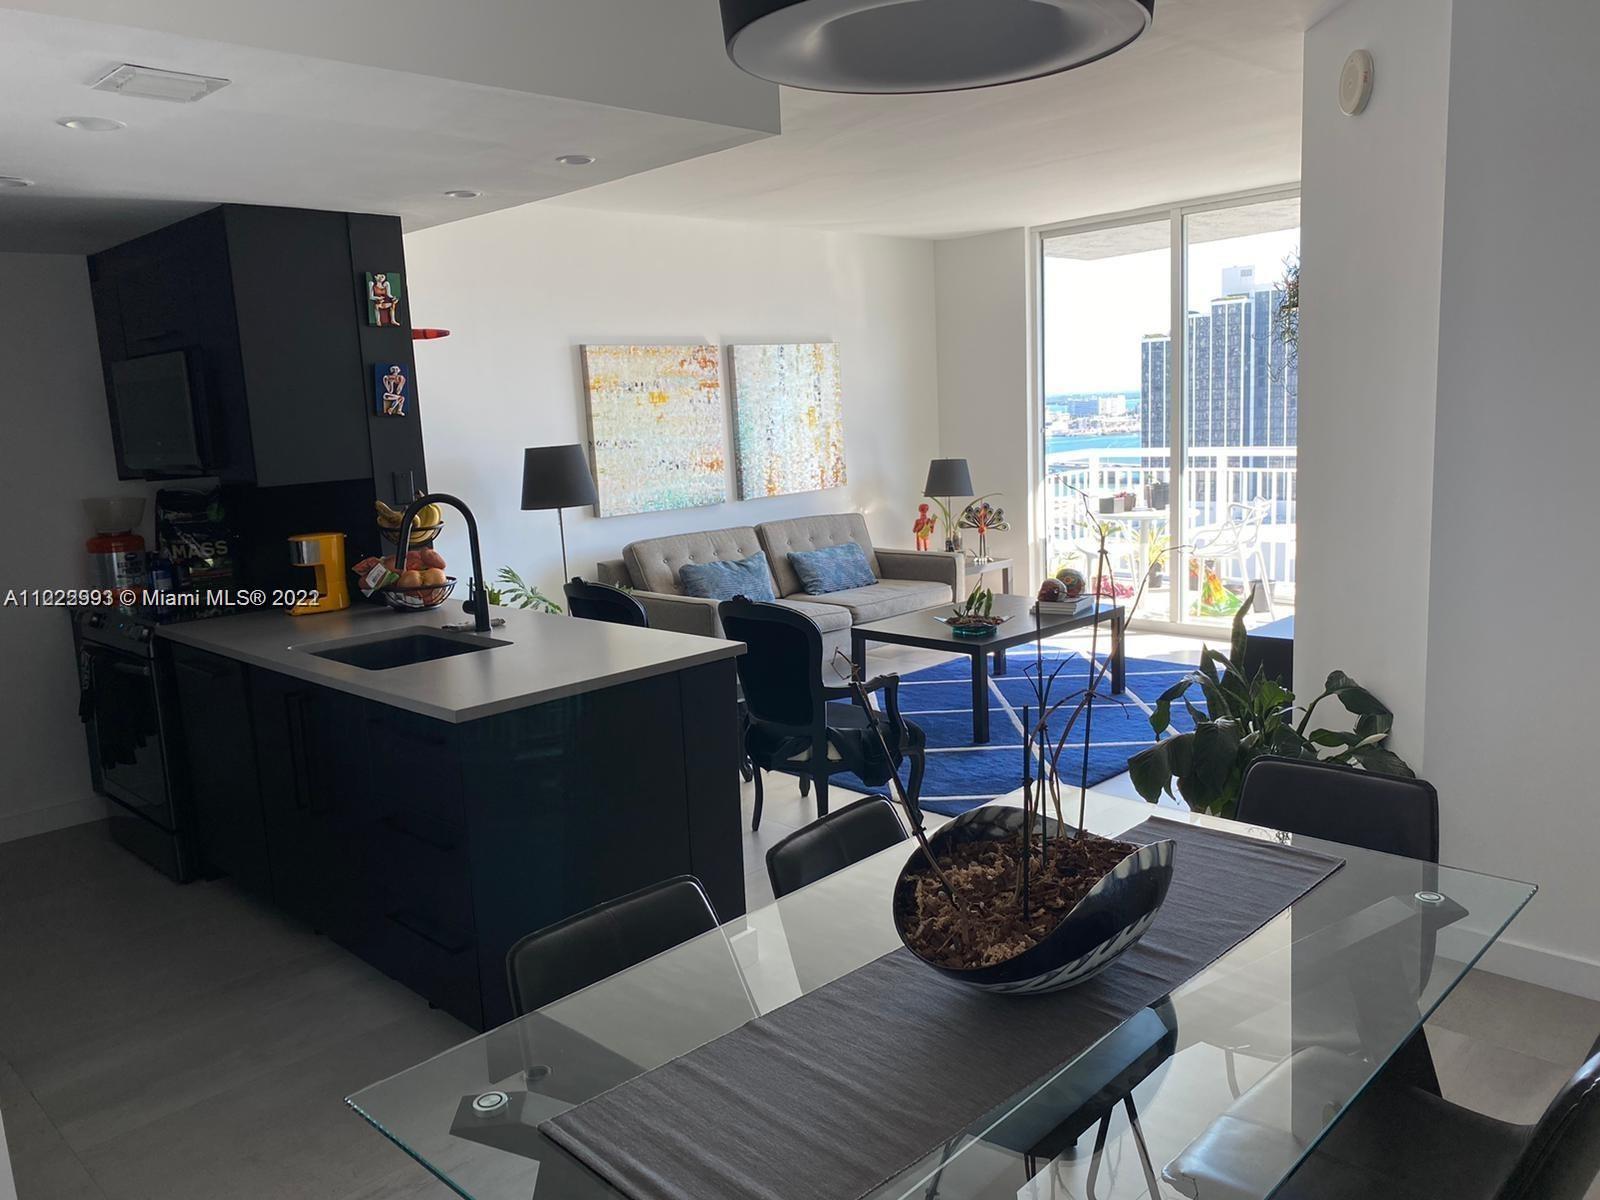 Beautifully remodeled 1 bed/1 bath Apartment located at the corner of Biscayne Blvd and 18th st in the Edgewater/Midtown Miami Arts District Area. Close to Miami Beach, Airport and desired areas in Miami. Cable and Internet Included. Current Lease Expires April 2023